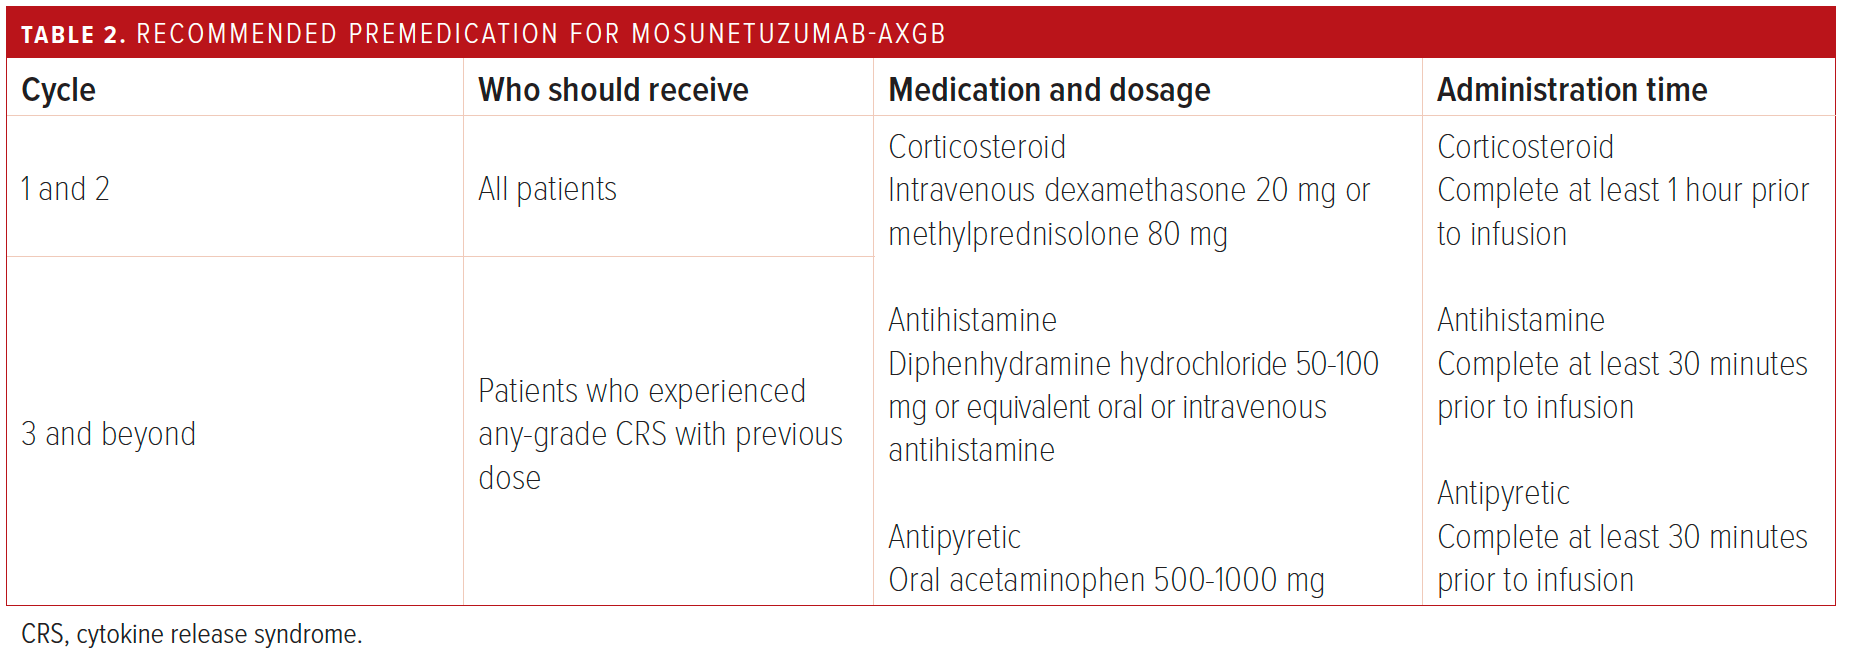 Recommended Premedication for Mosunetuzumab-axgb